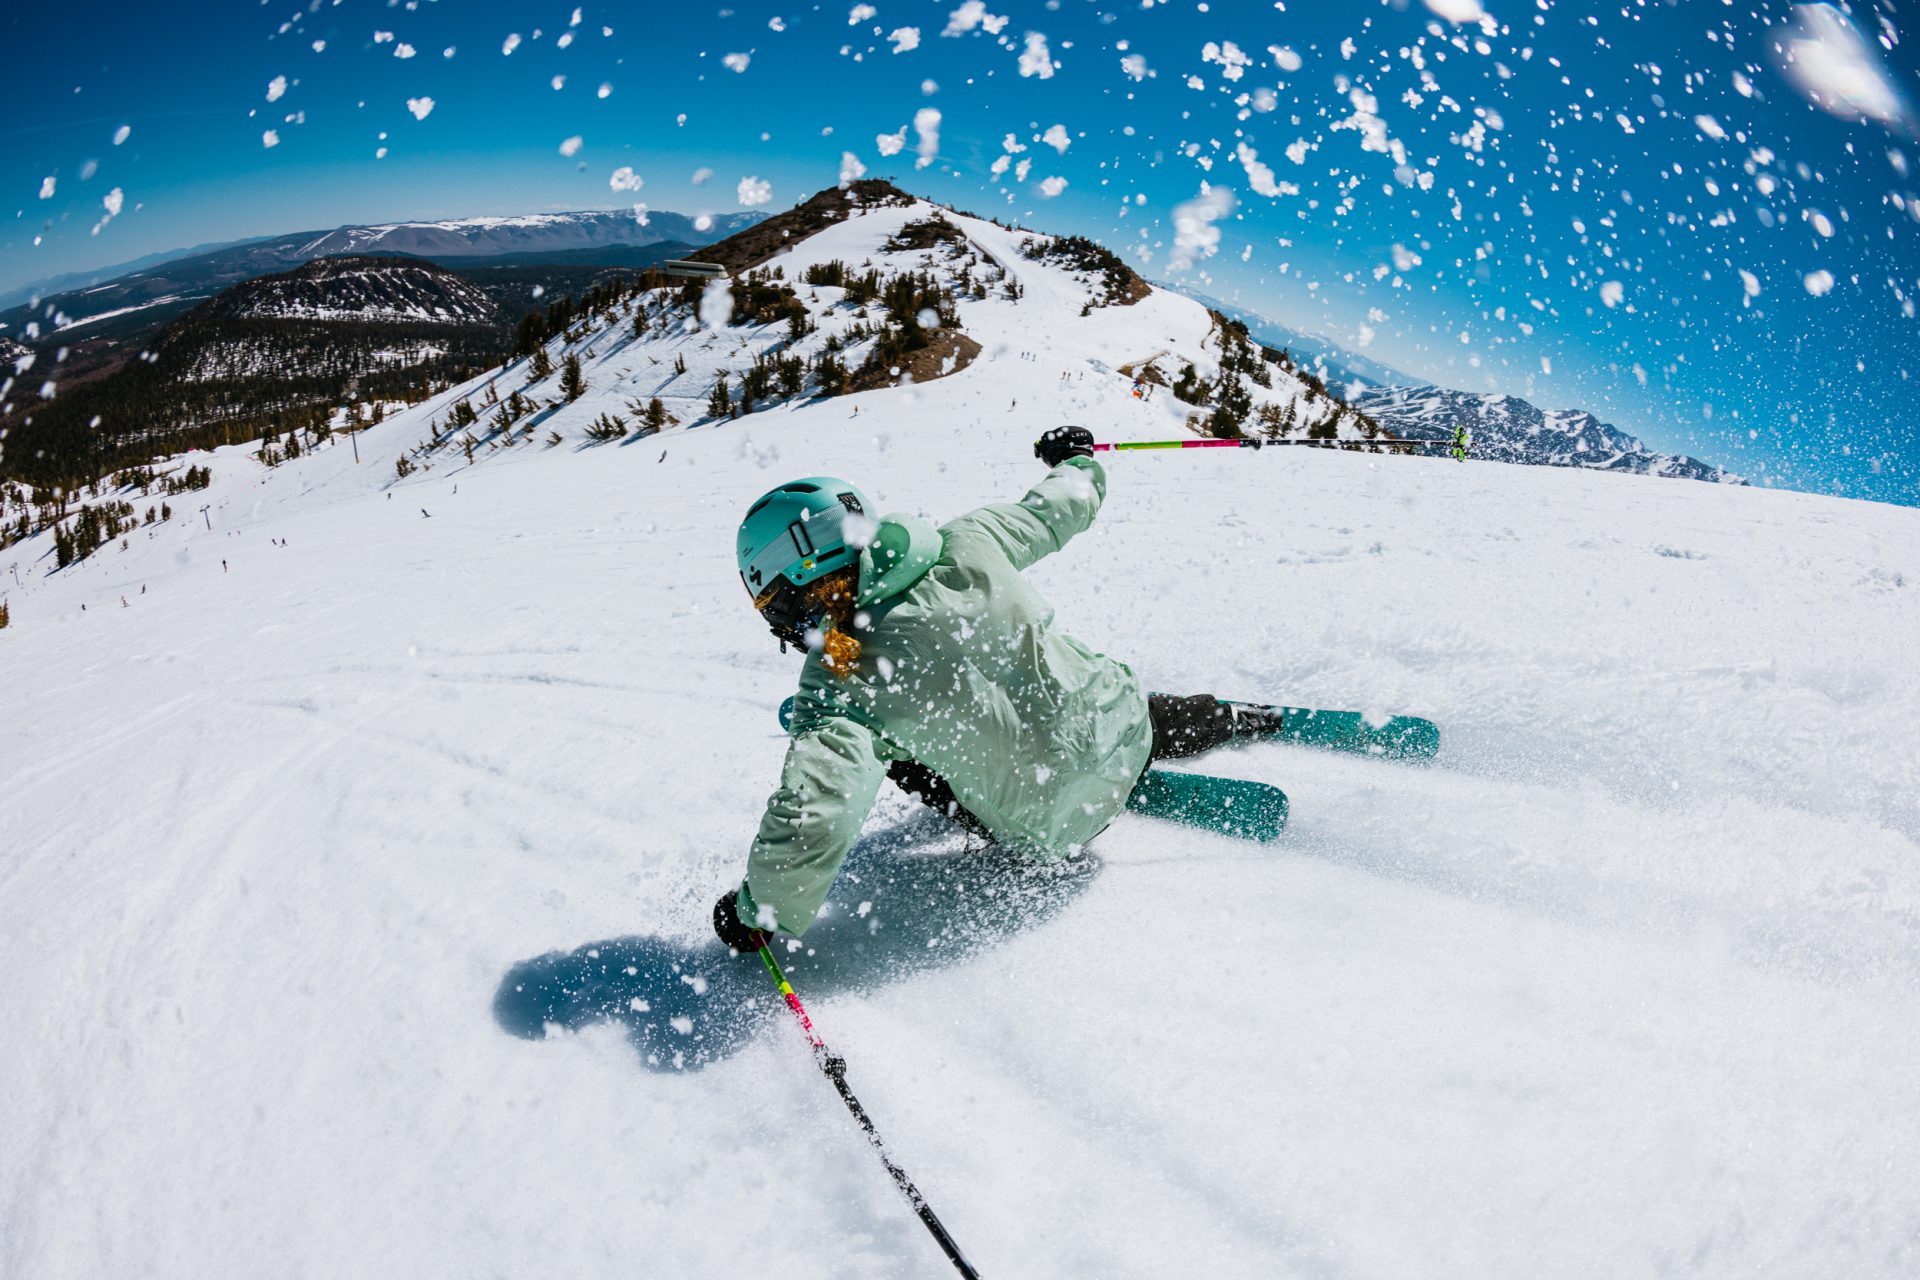 Skier carving down snowy mountain during Second Season at Mammoth Mountain this spring